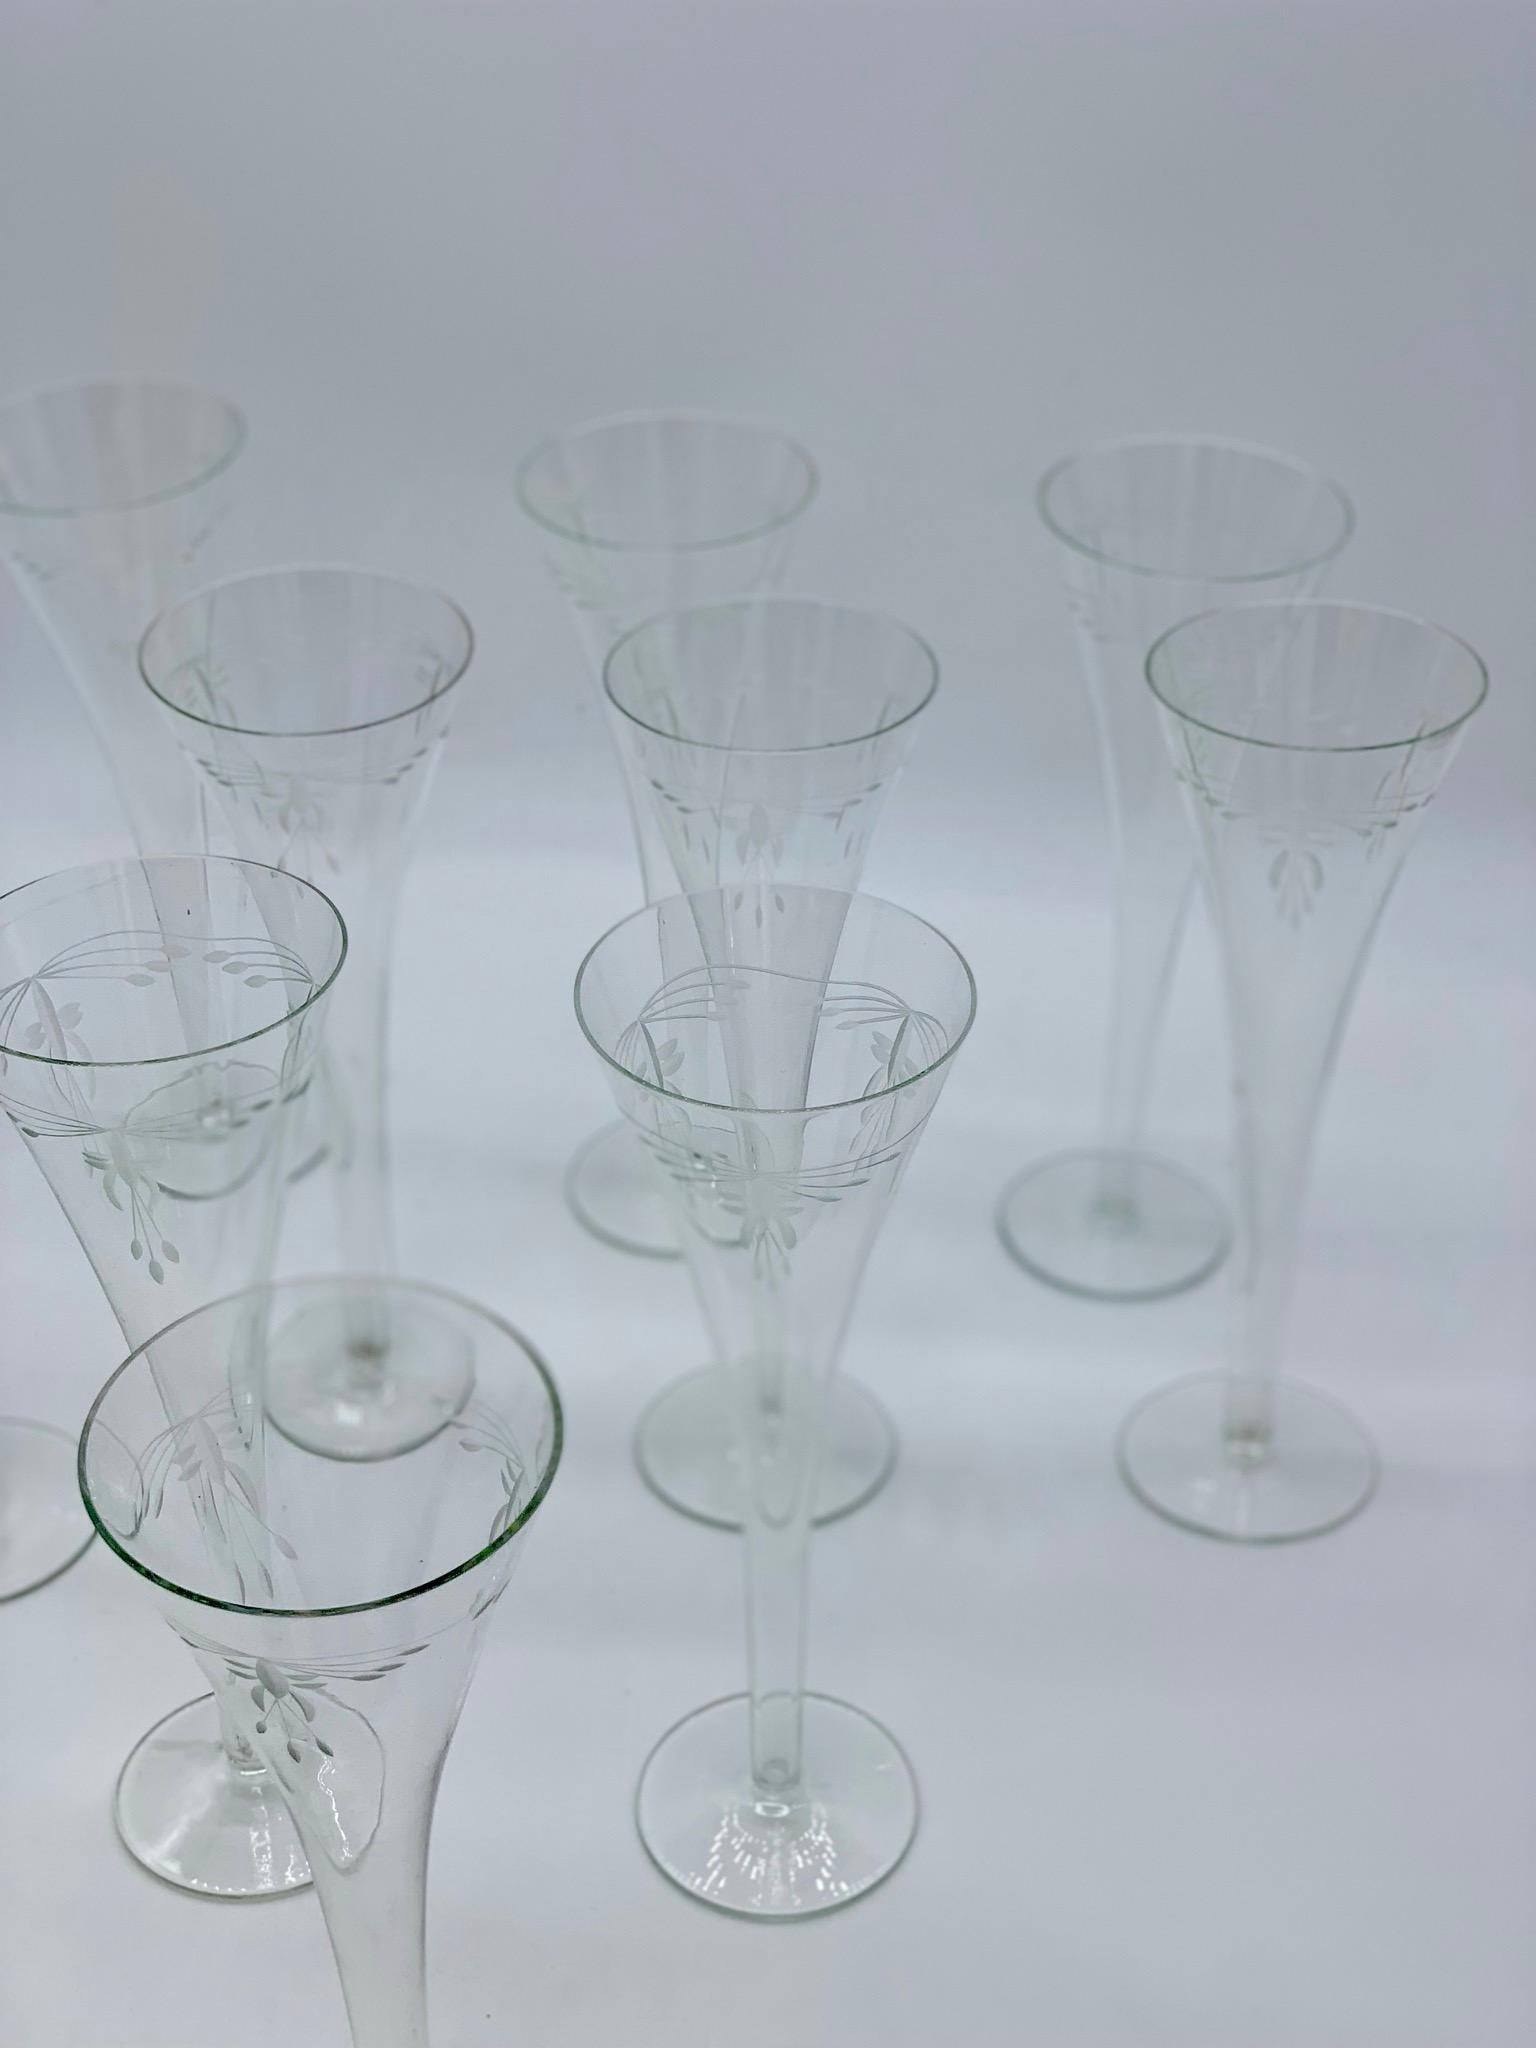 1900-1920 Art Nouveau Crystal Glasses Hand Blown with Engraved Flowers For Sale 7